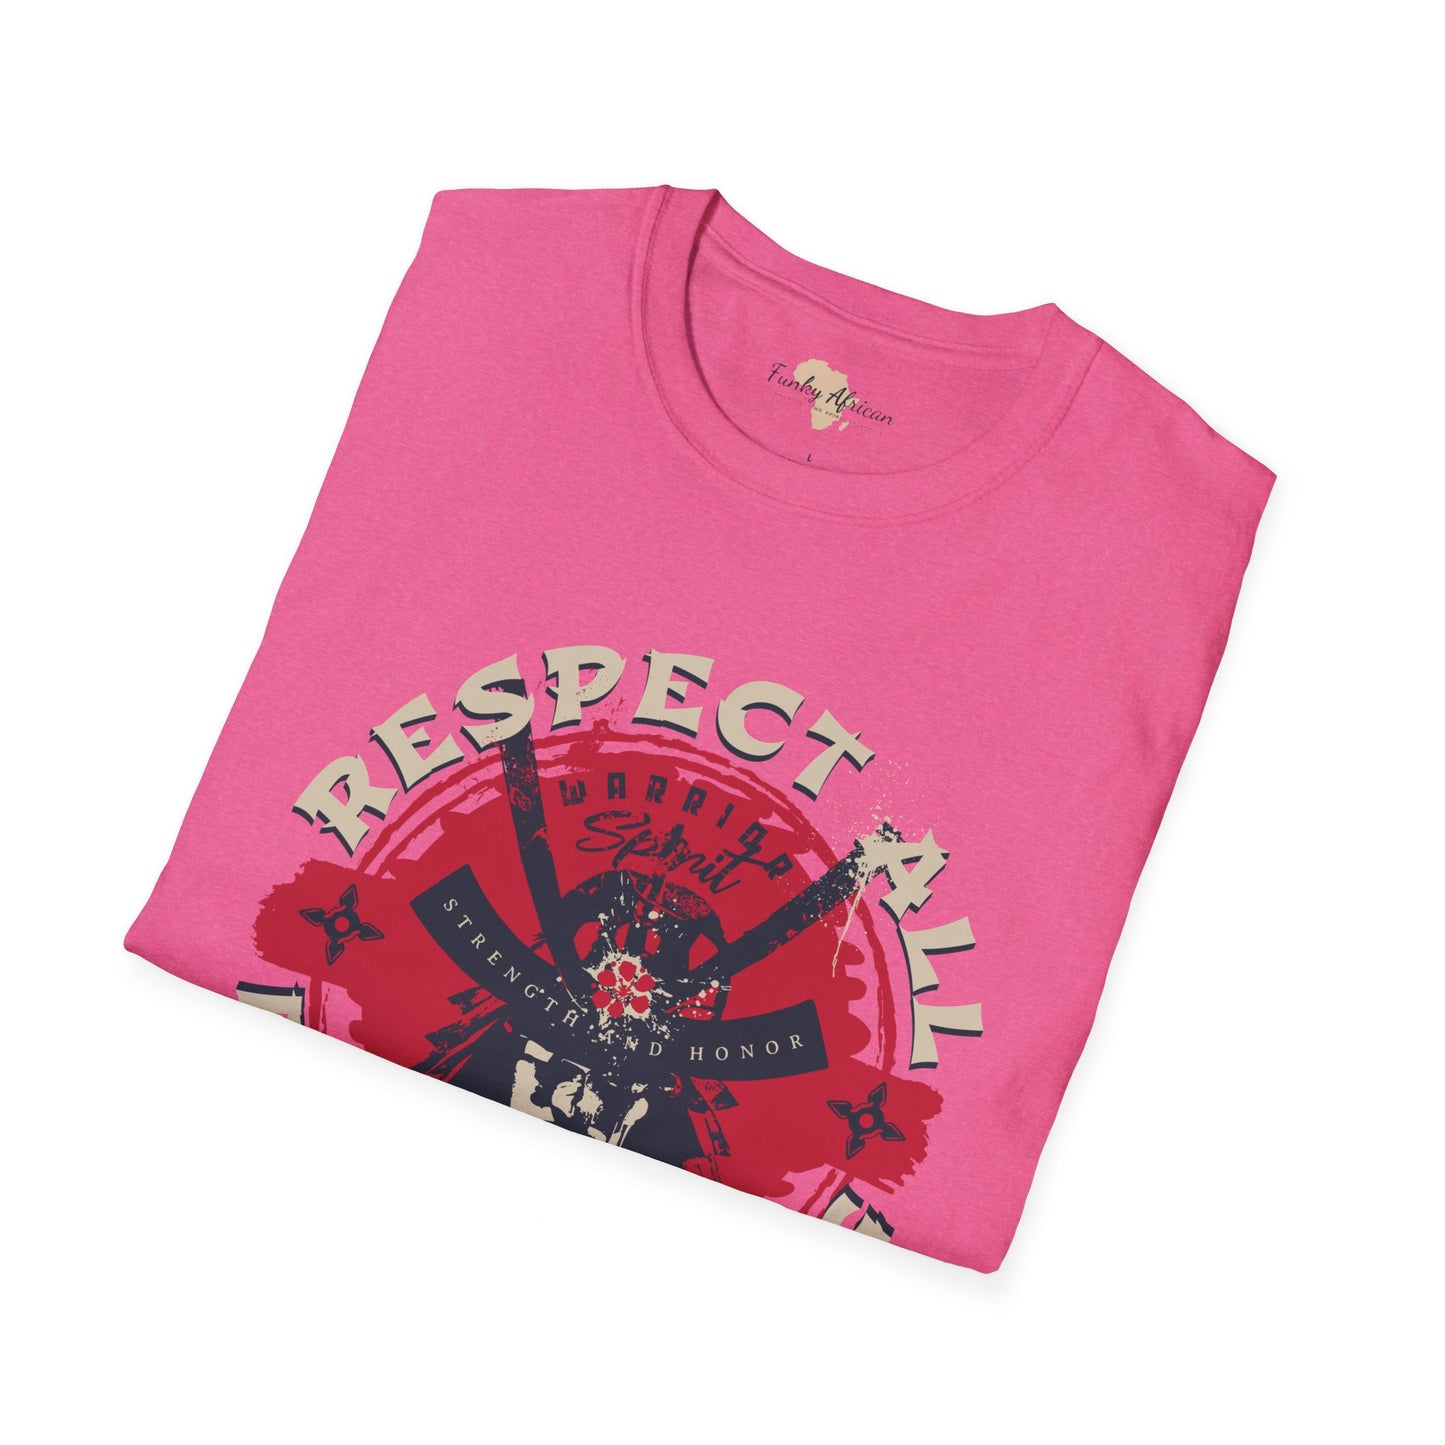 Respect all unisex softstyle tee